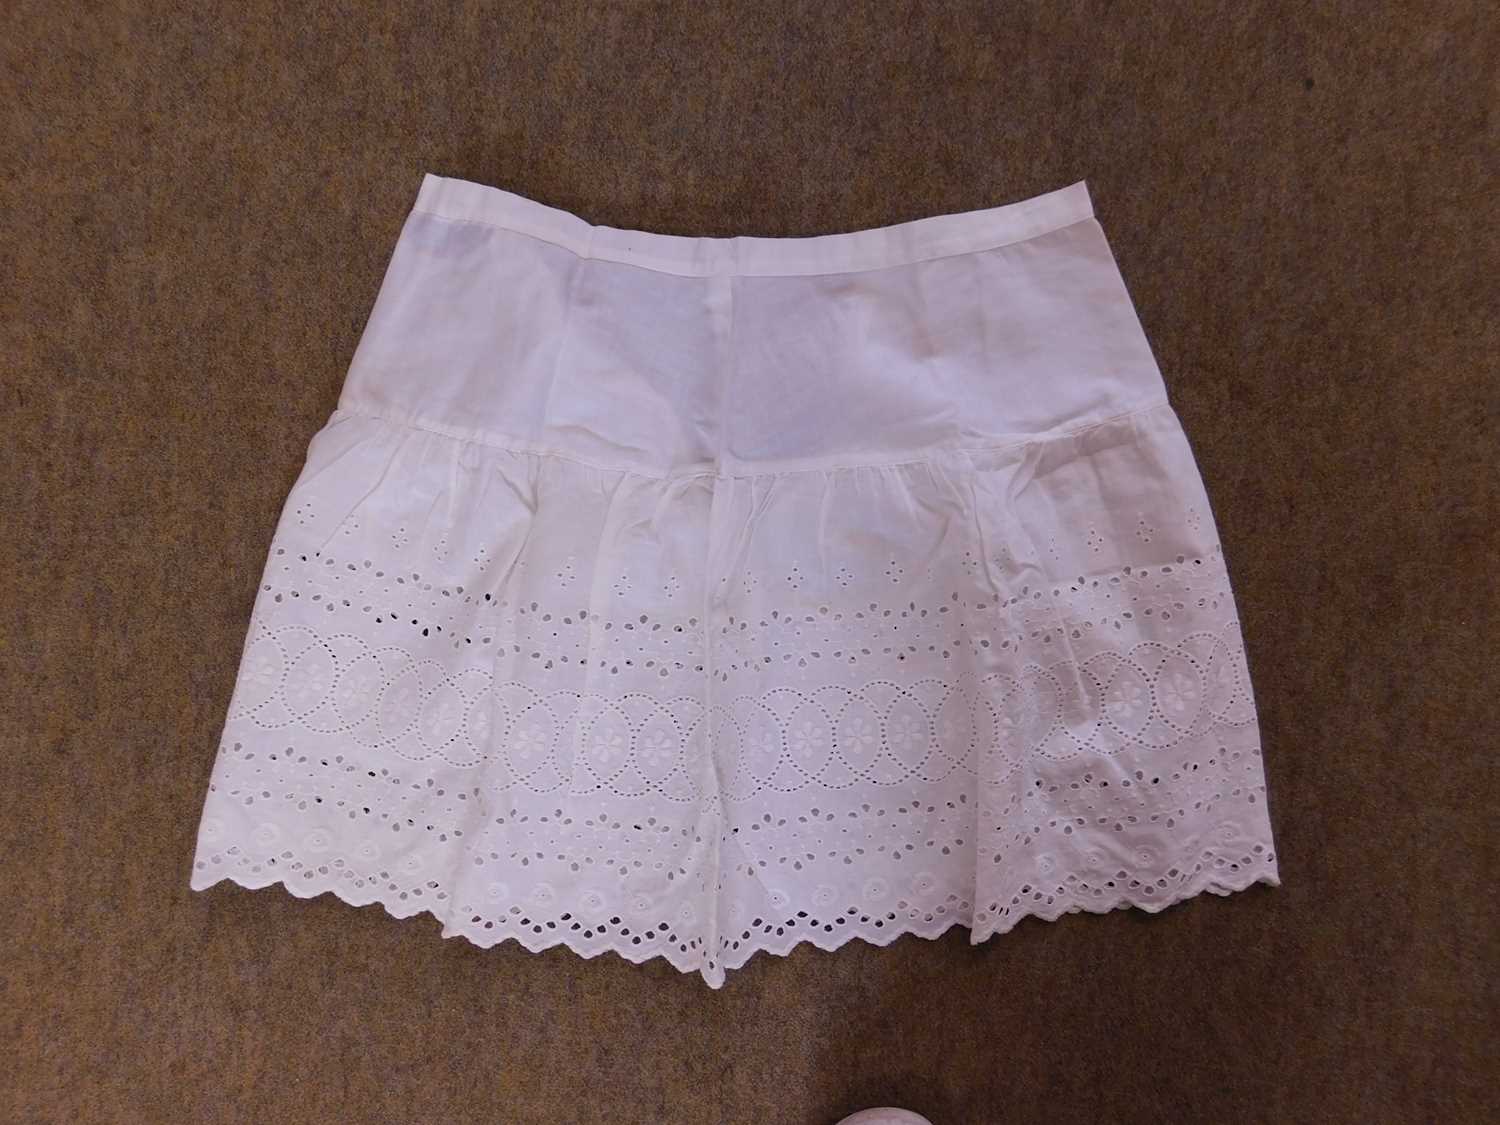 Four mid-20th century skirts, to include a floral patterned skirt, a cream cotton skirt with - Image 2 of 5